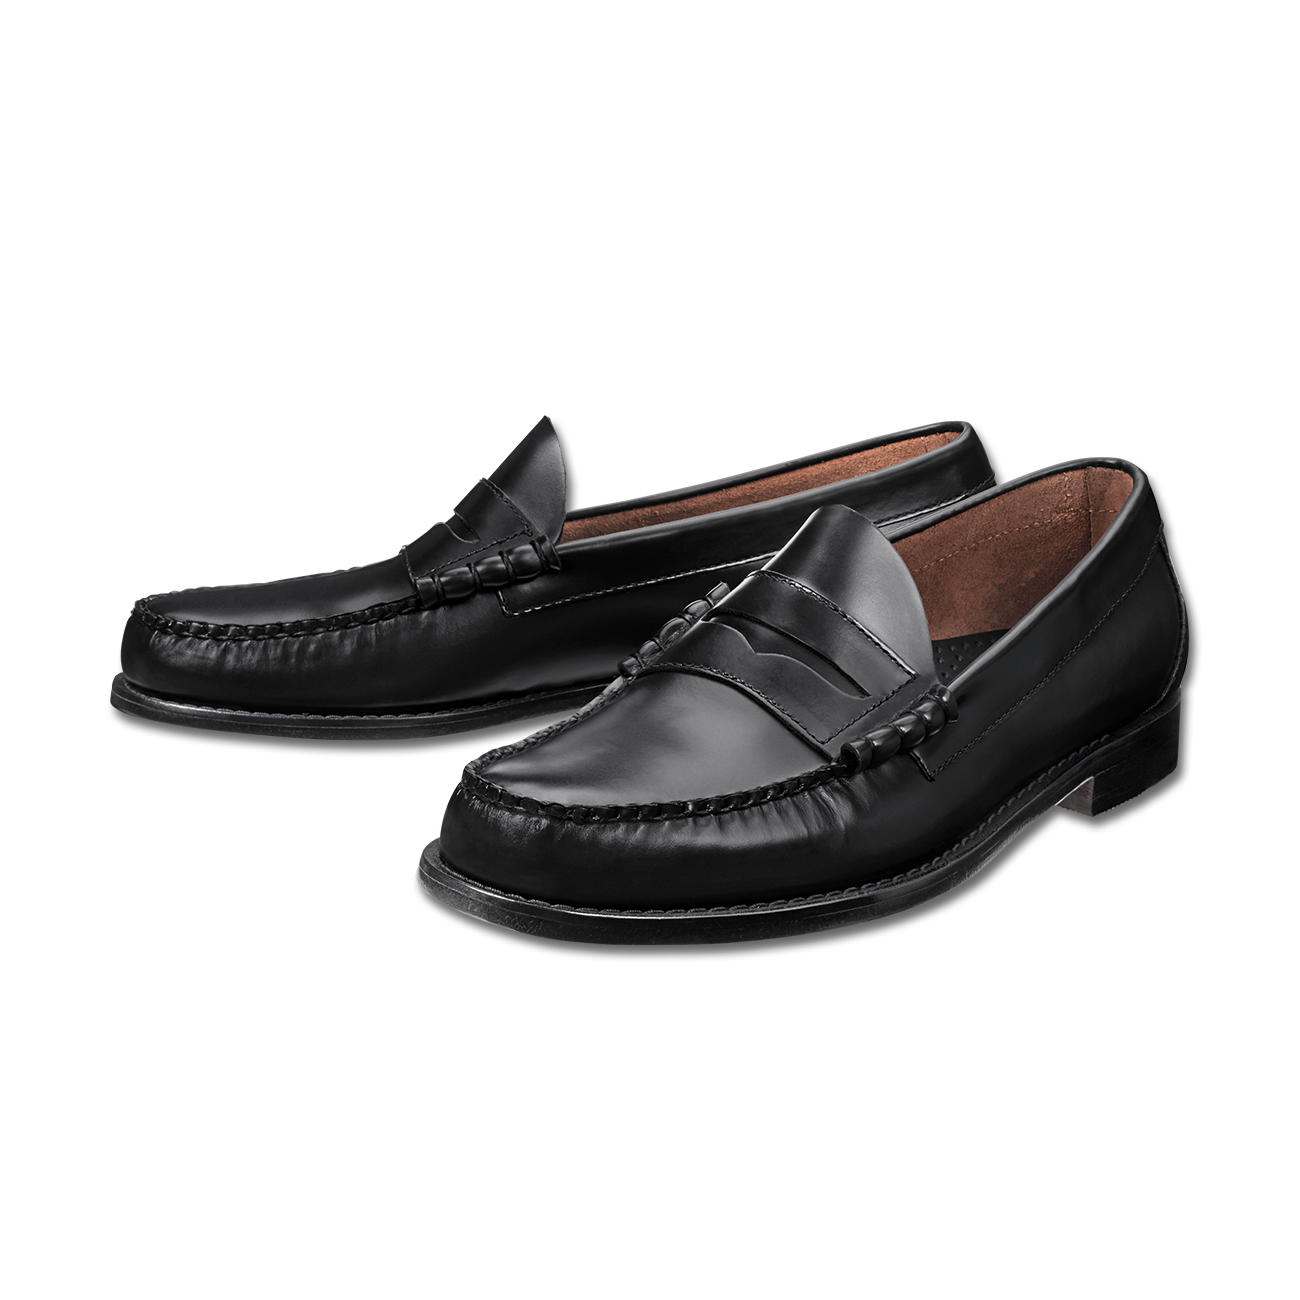 Penny loafer G. H. Bass Weejuns